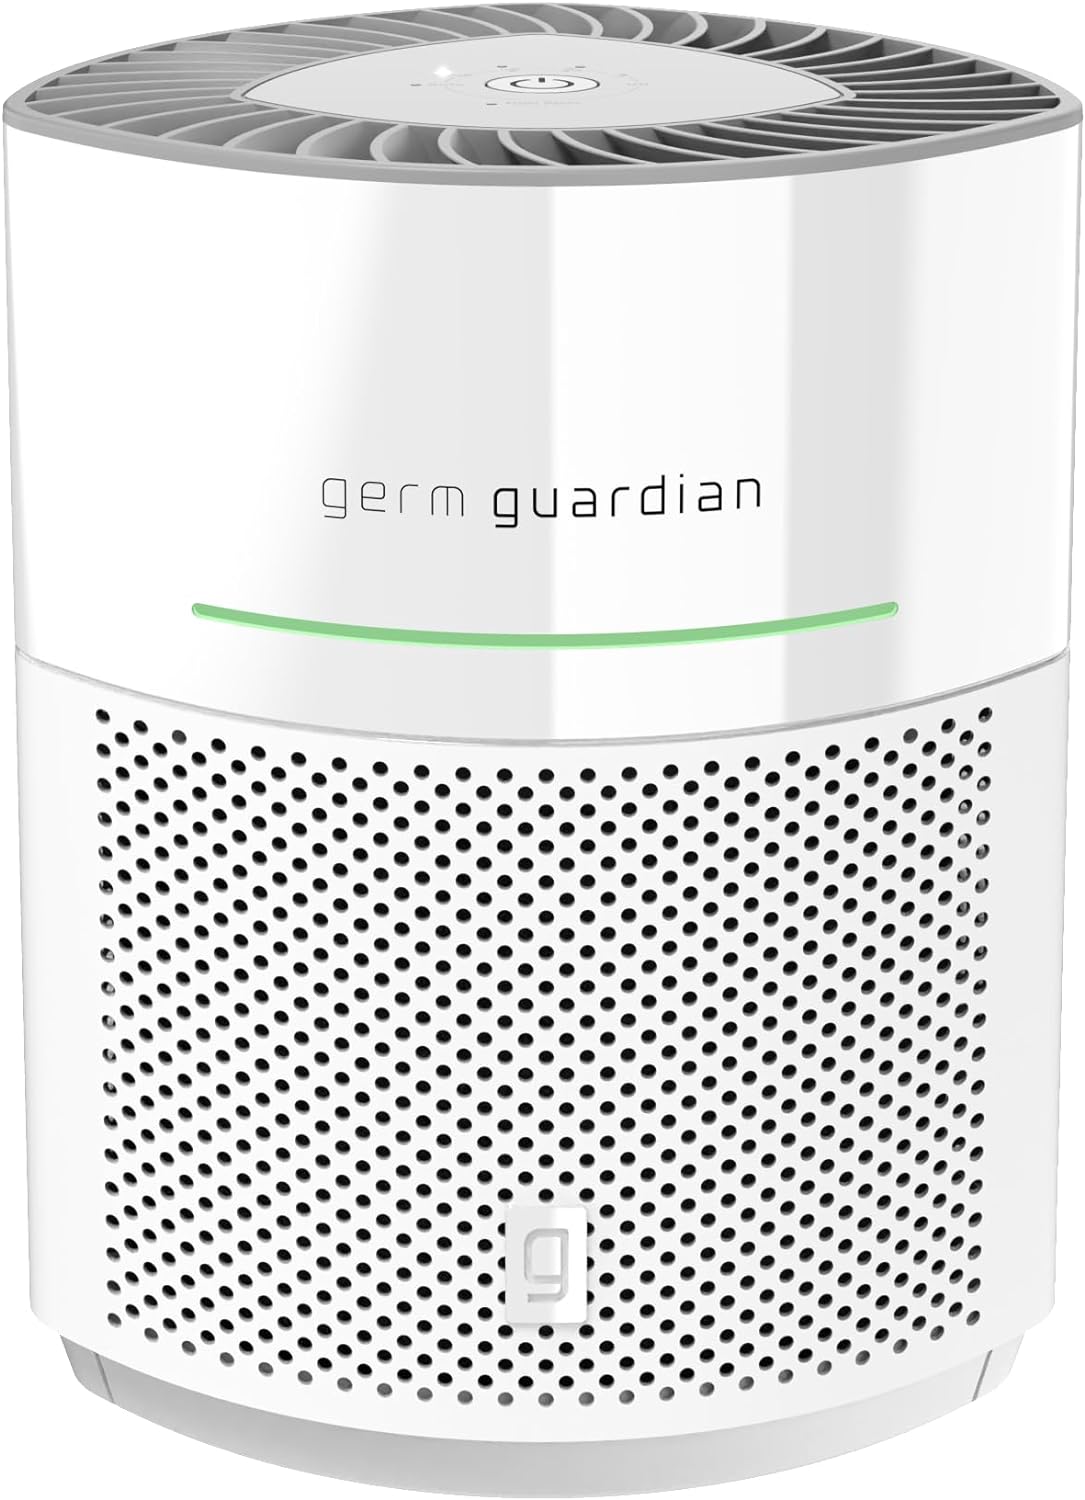 GermGuardian Airsafe Intelligent Air Purifier, Air Quality Sensor, 360 HEPA Filter, Large Room up to 1040 Sq. Ft., Captures 99.97% of Pollutants, Wildfire Smoke, Odors, White AP3151W